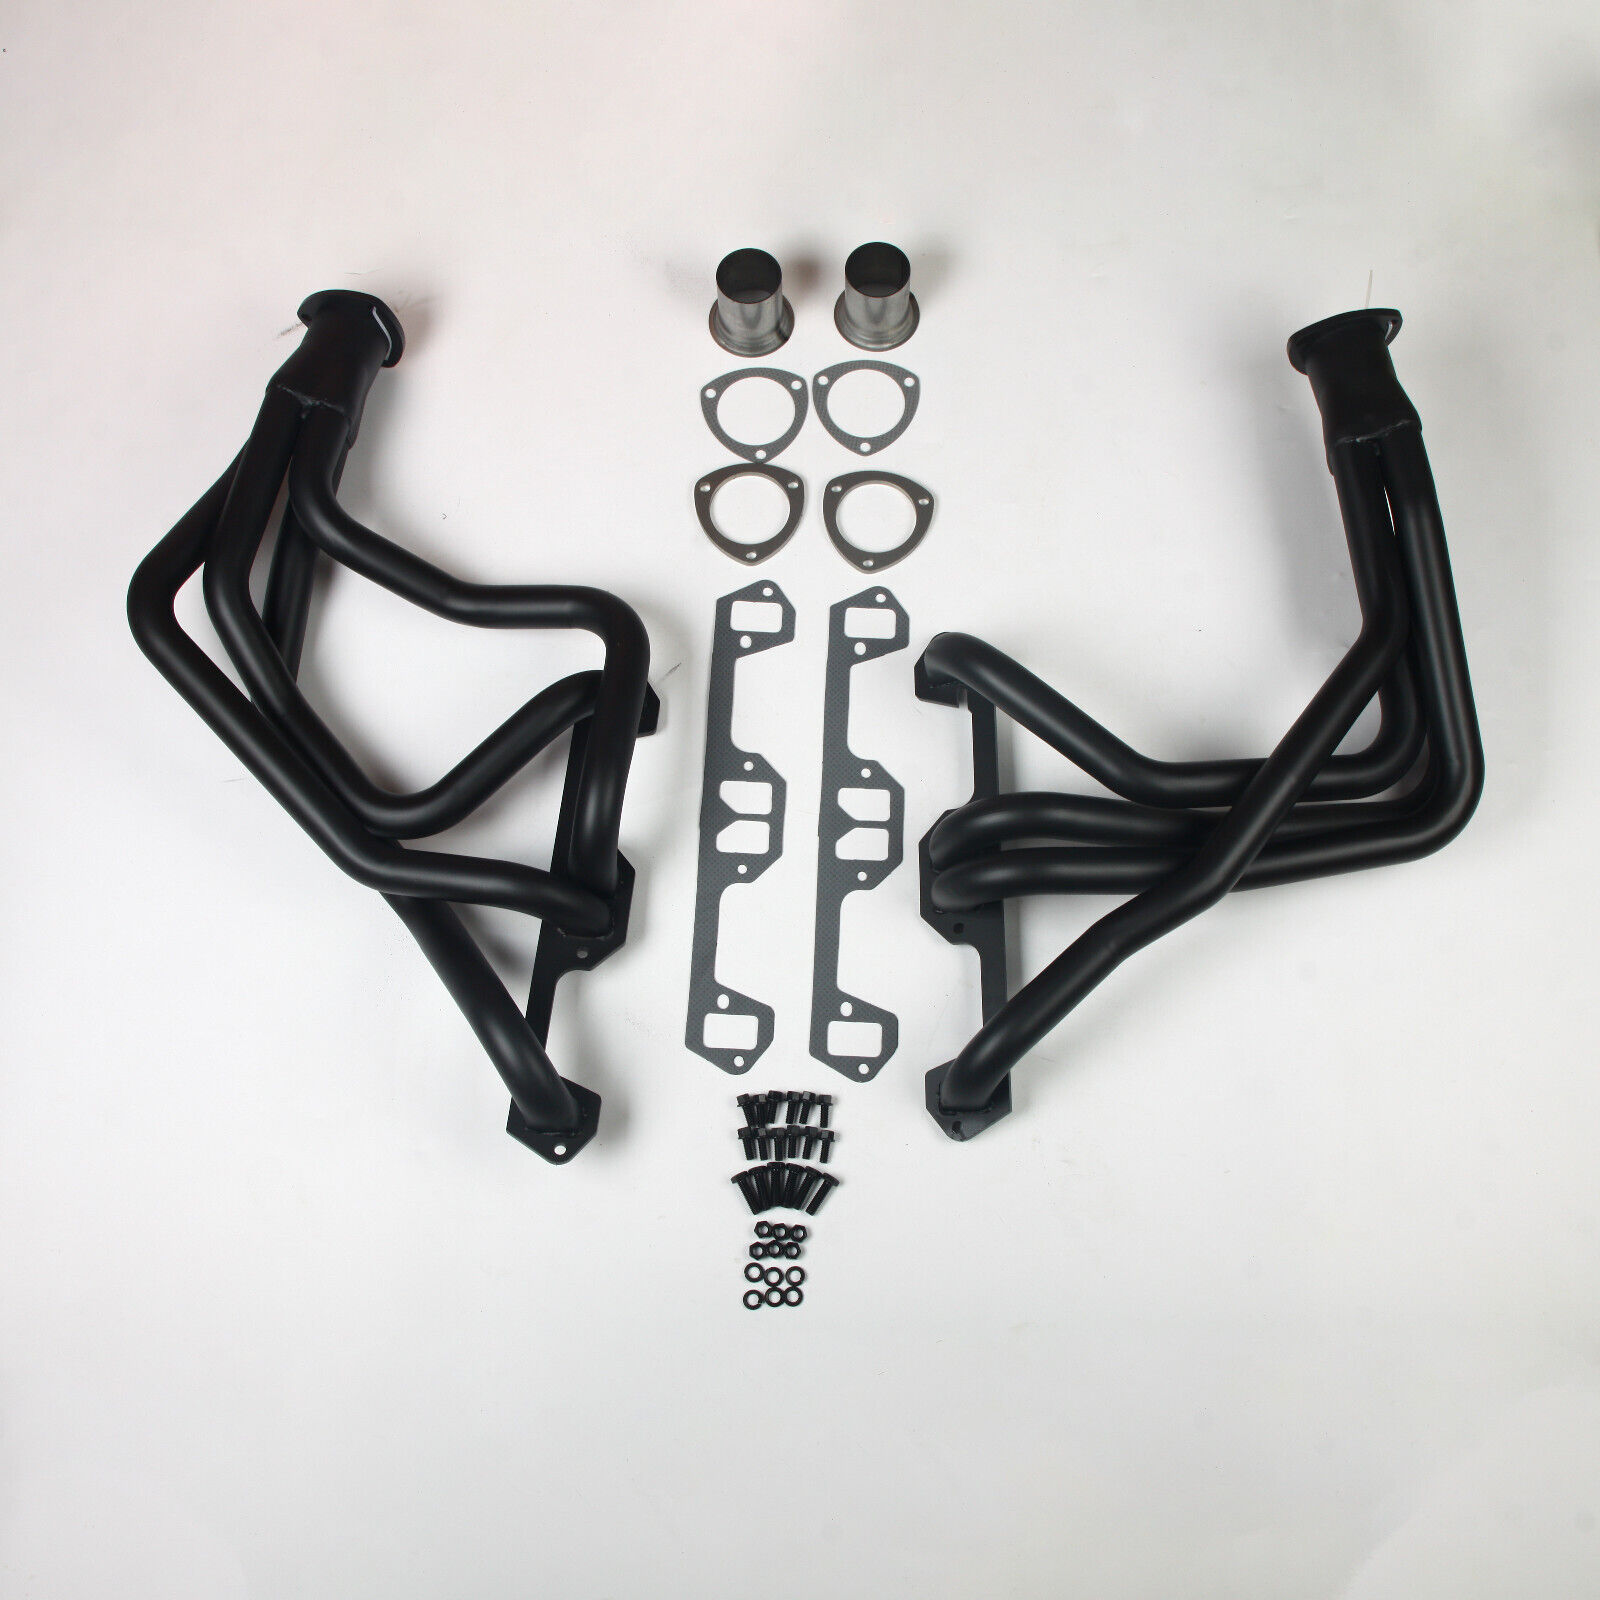 LONG TUBE HEADER Fits 1972-1974 Dodge D150 D250 W150  Plymouth 2WD & 4WD Black